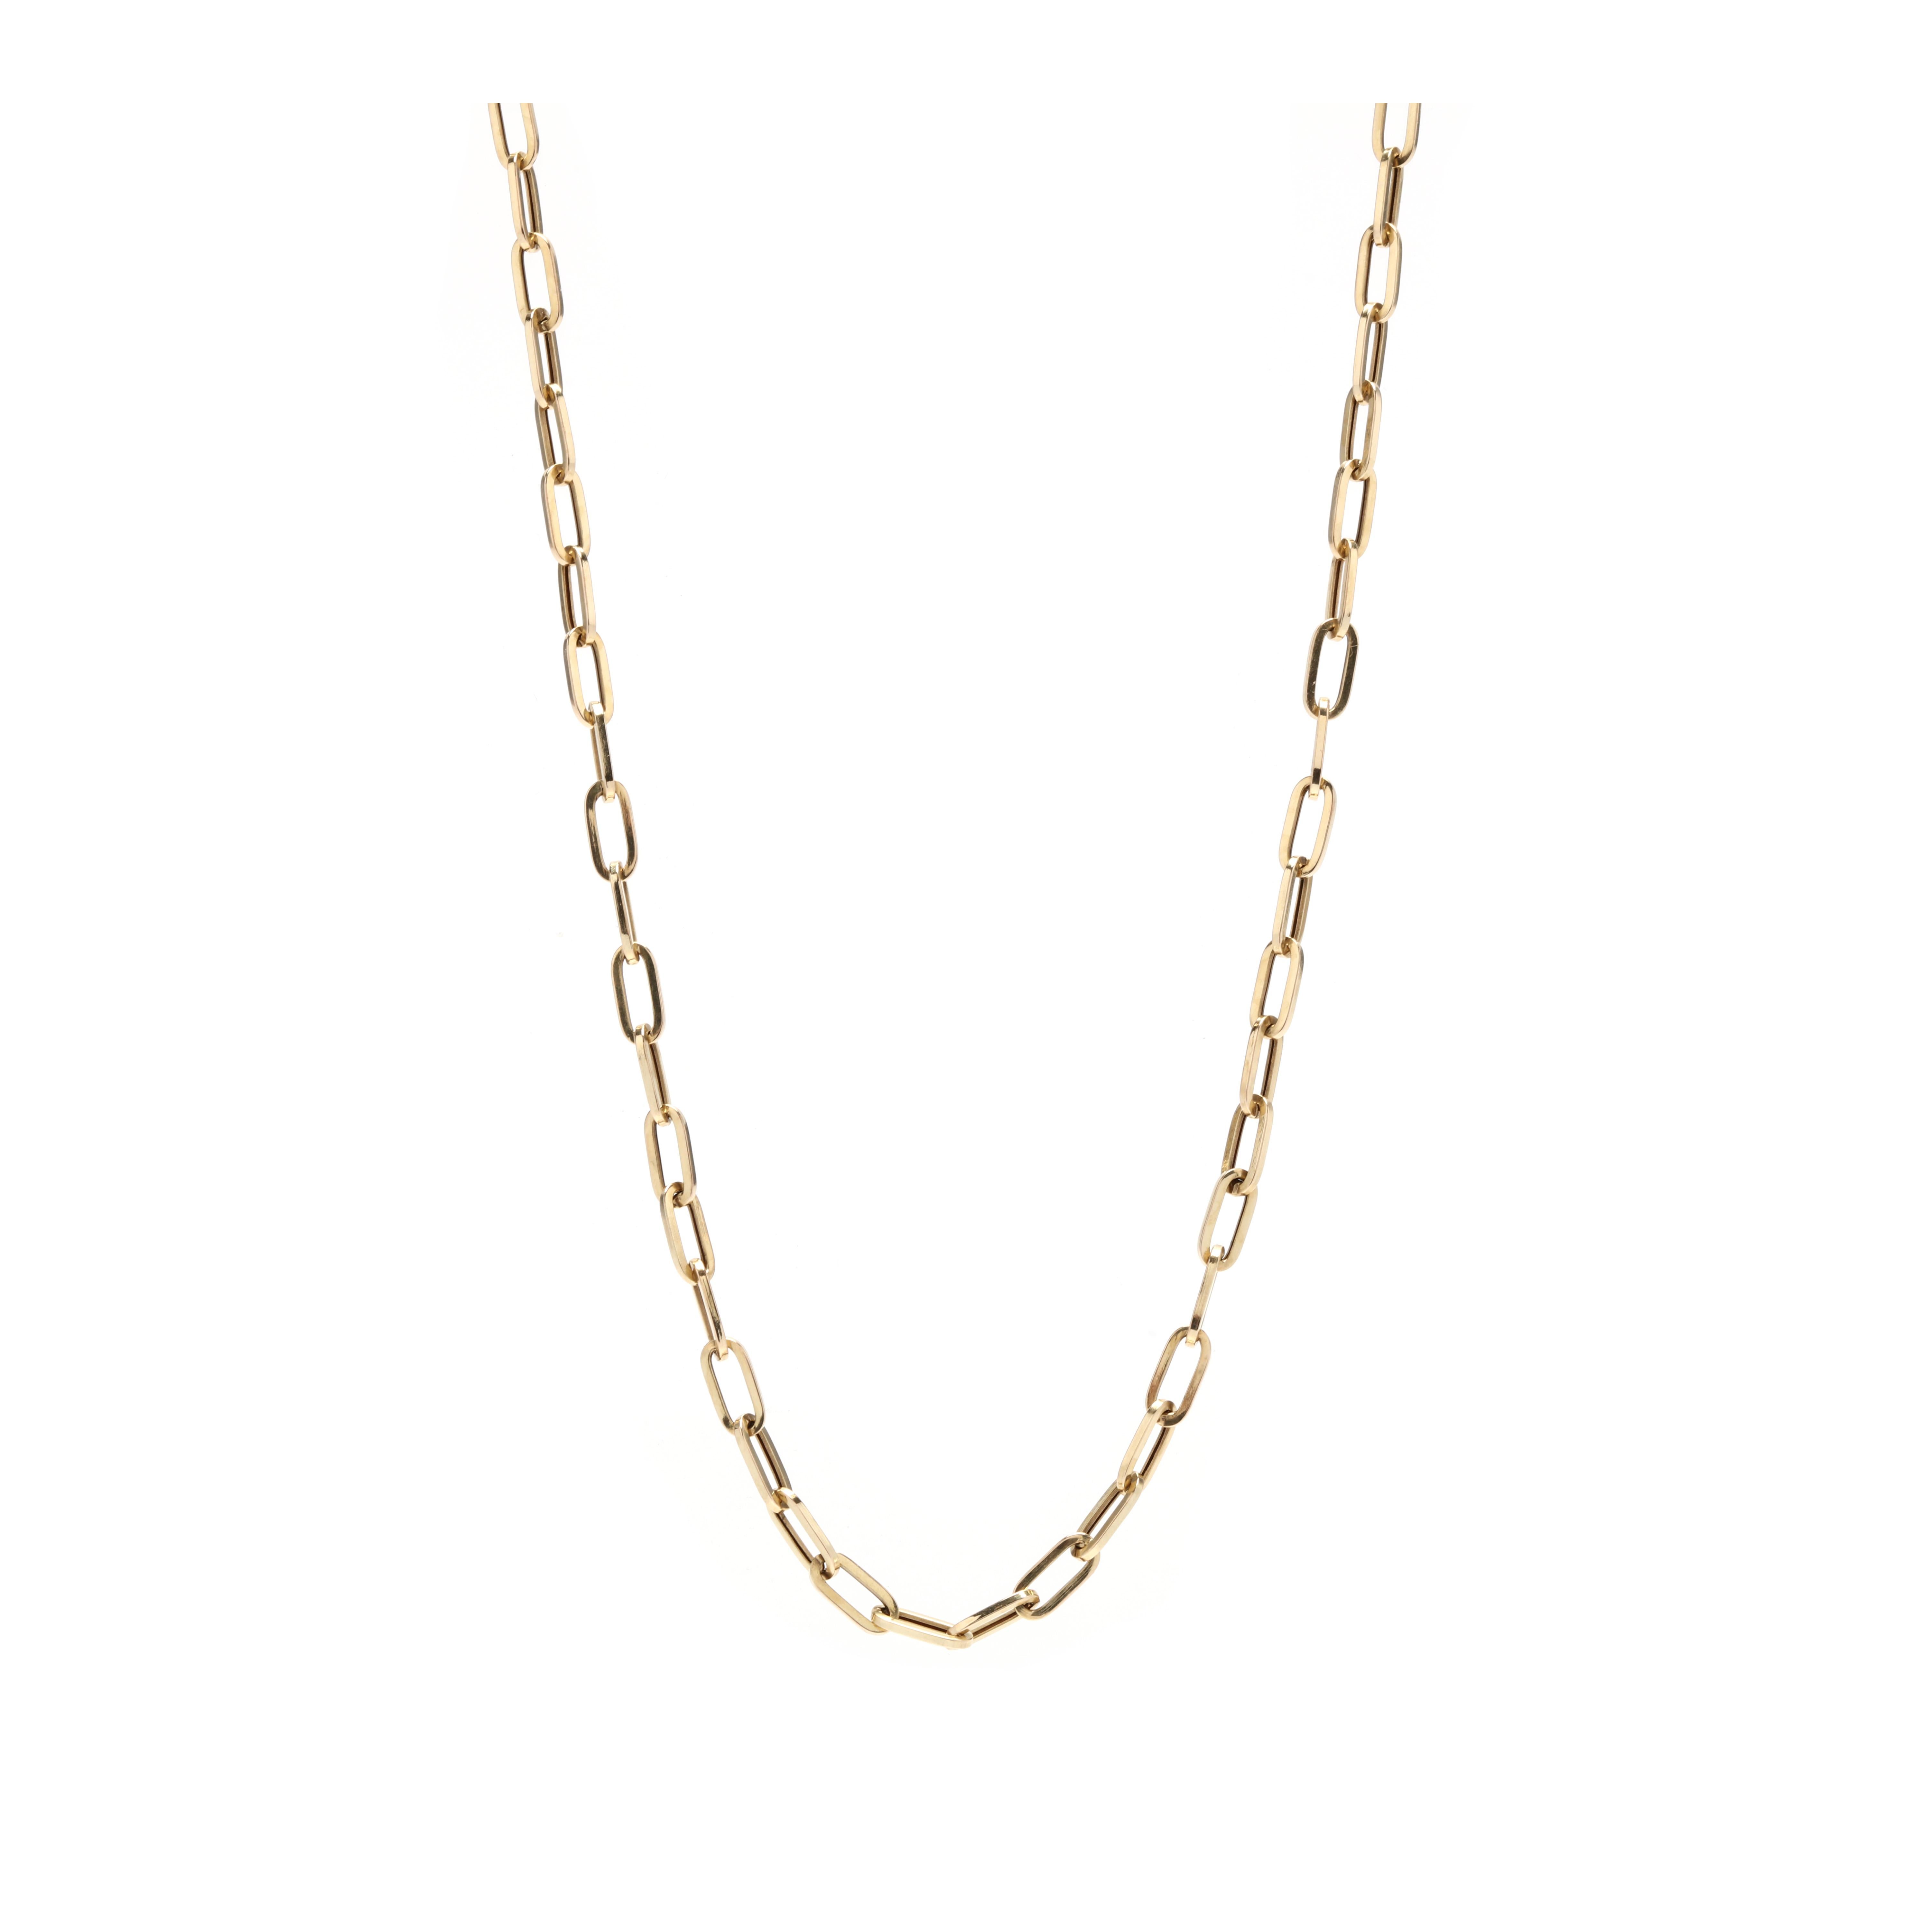 Women's or Men's Medium Paperclip Chain Necklace, 14K Yellow Gold